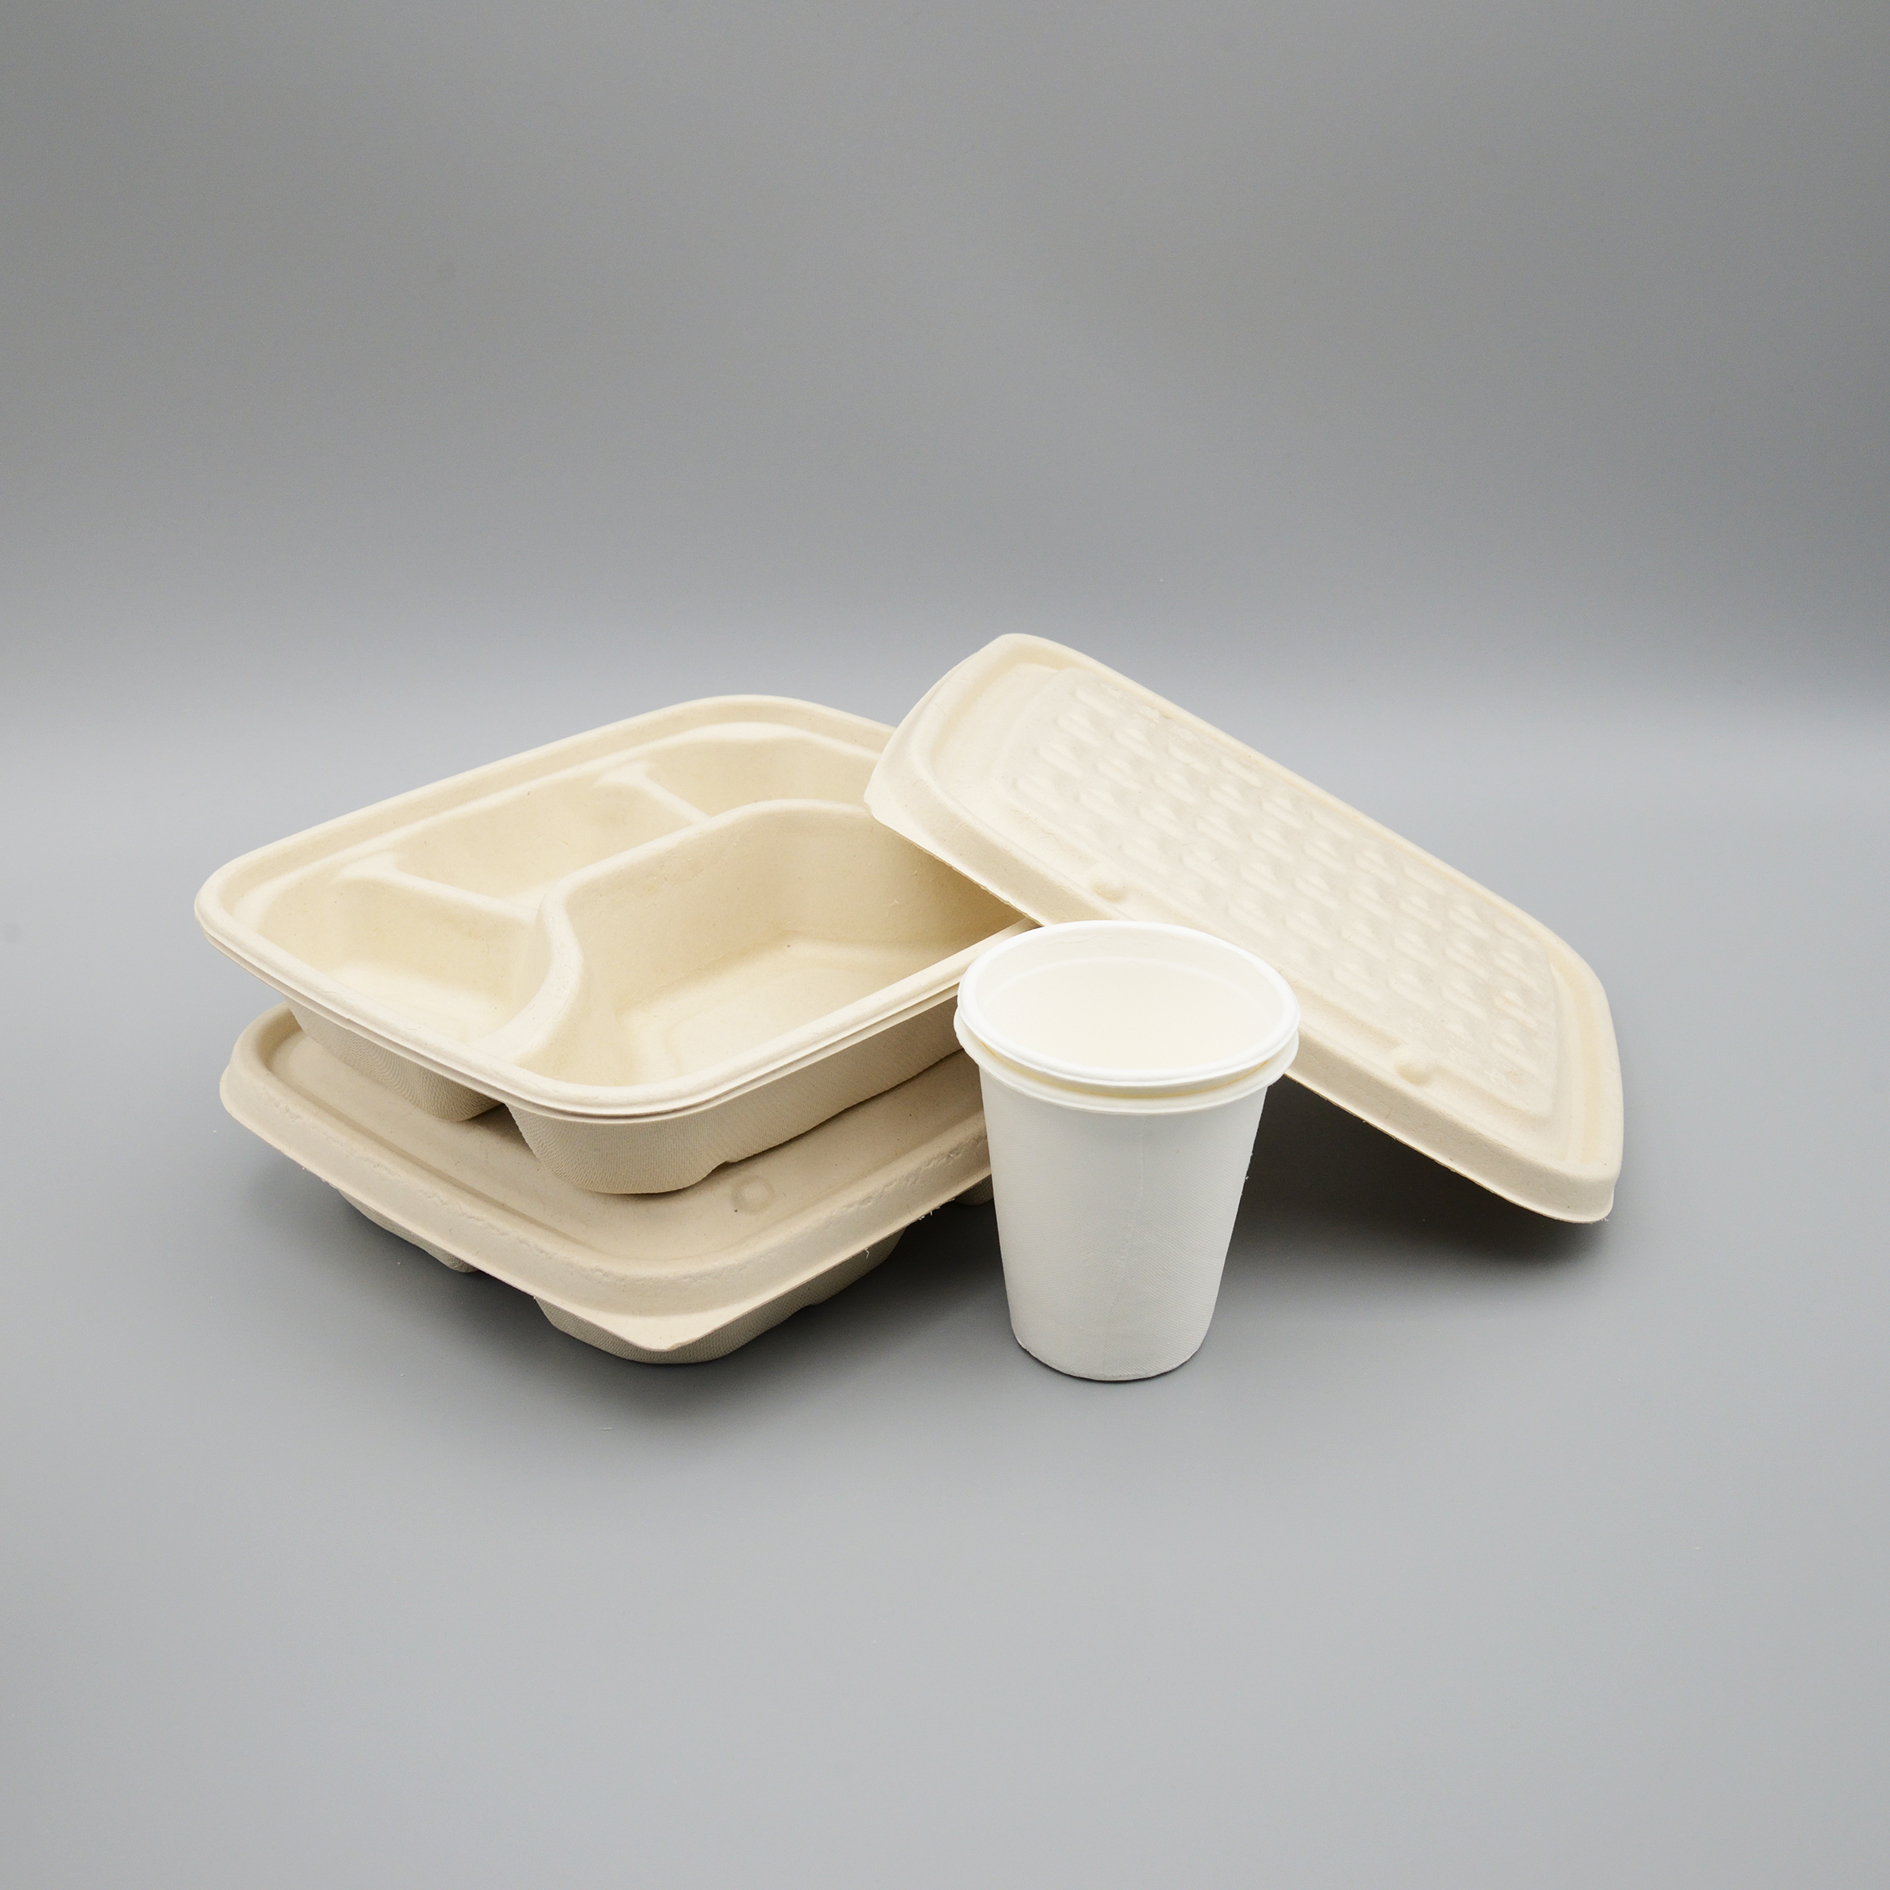 100% Compostable Sugarcane Food Tray /Container with Compartments